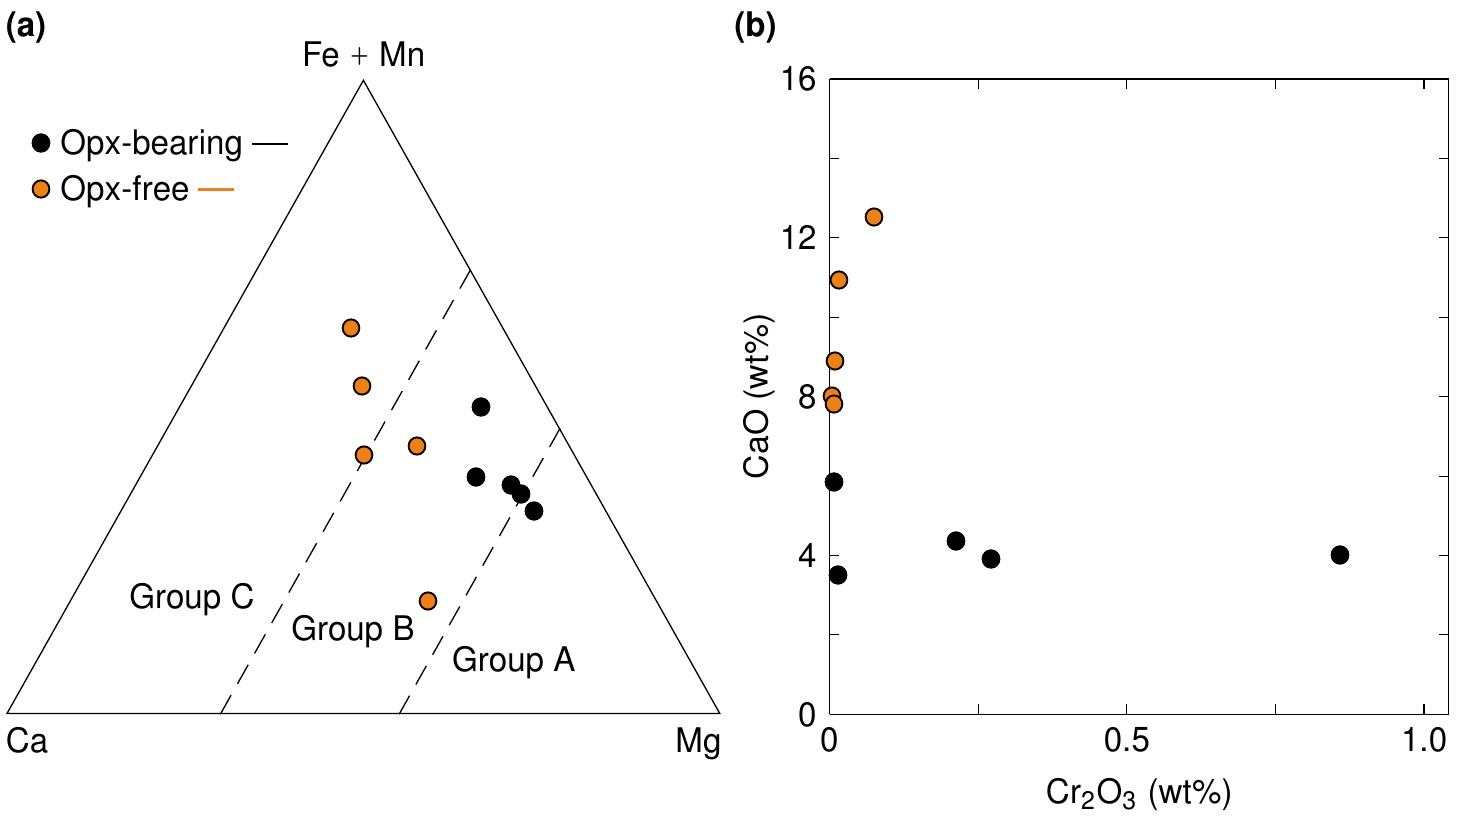 Major element and Cr<sub>2</sub>O<sub>3</sub> concentrations in Grt differ between Opx-bearing and Opx-free eclogite.